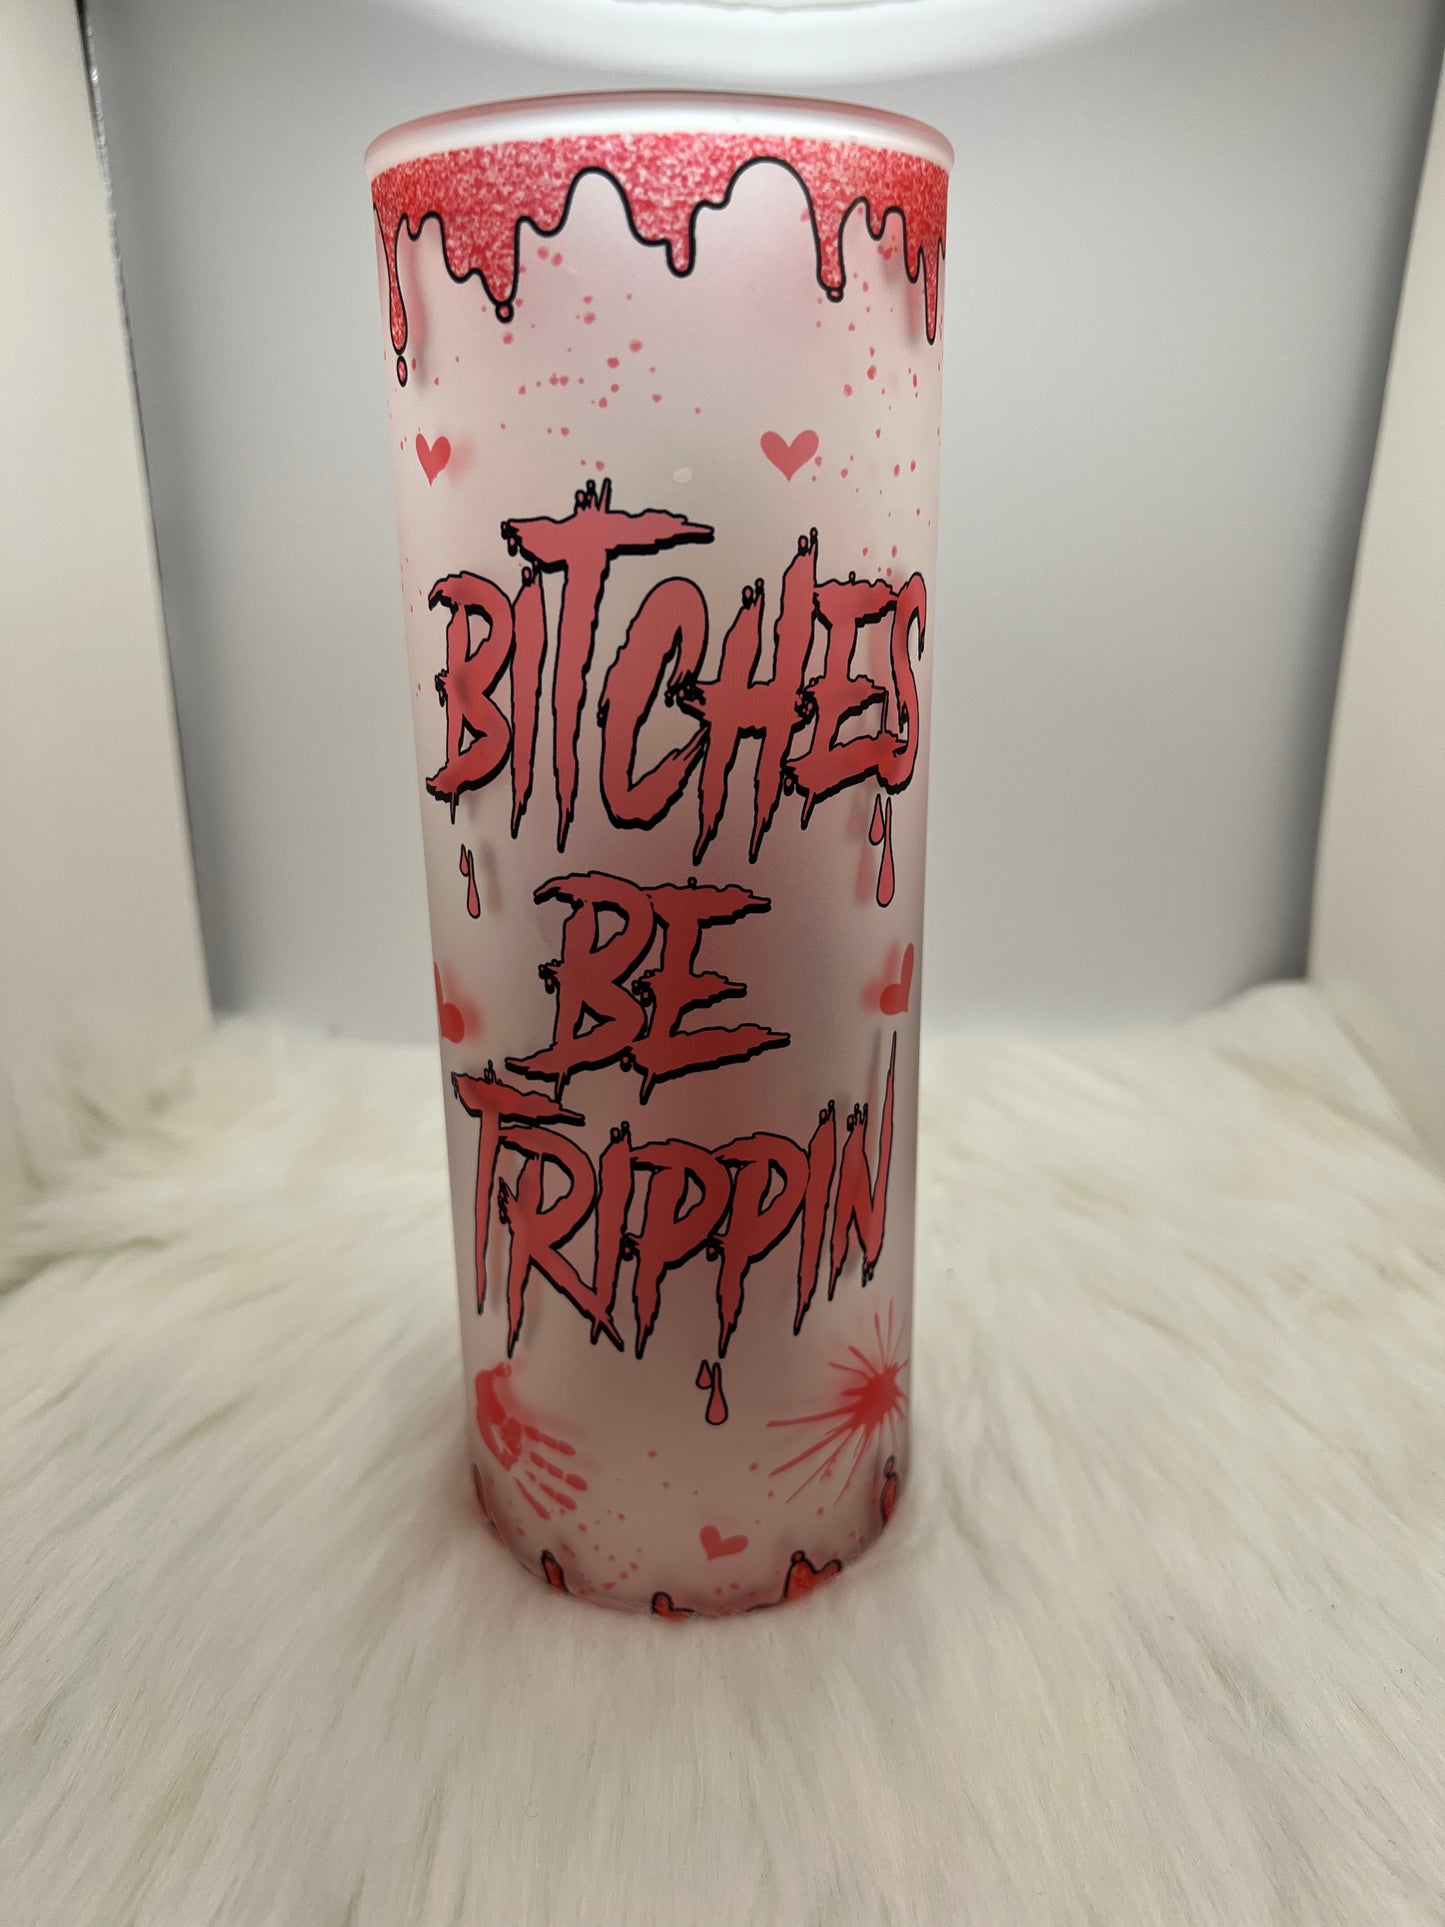 Bitches be trippin 25oz frosted tumbler